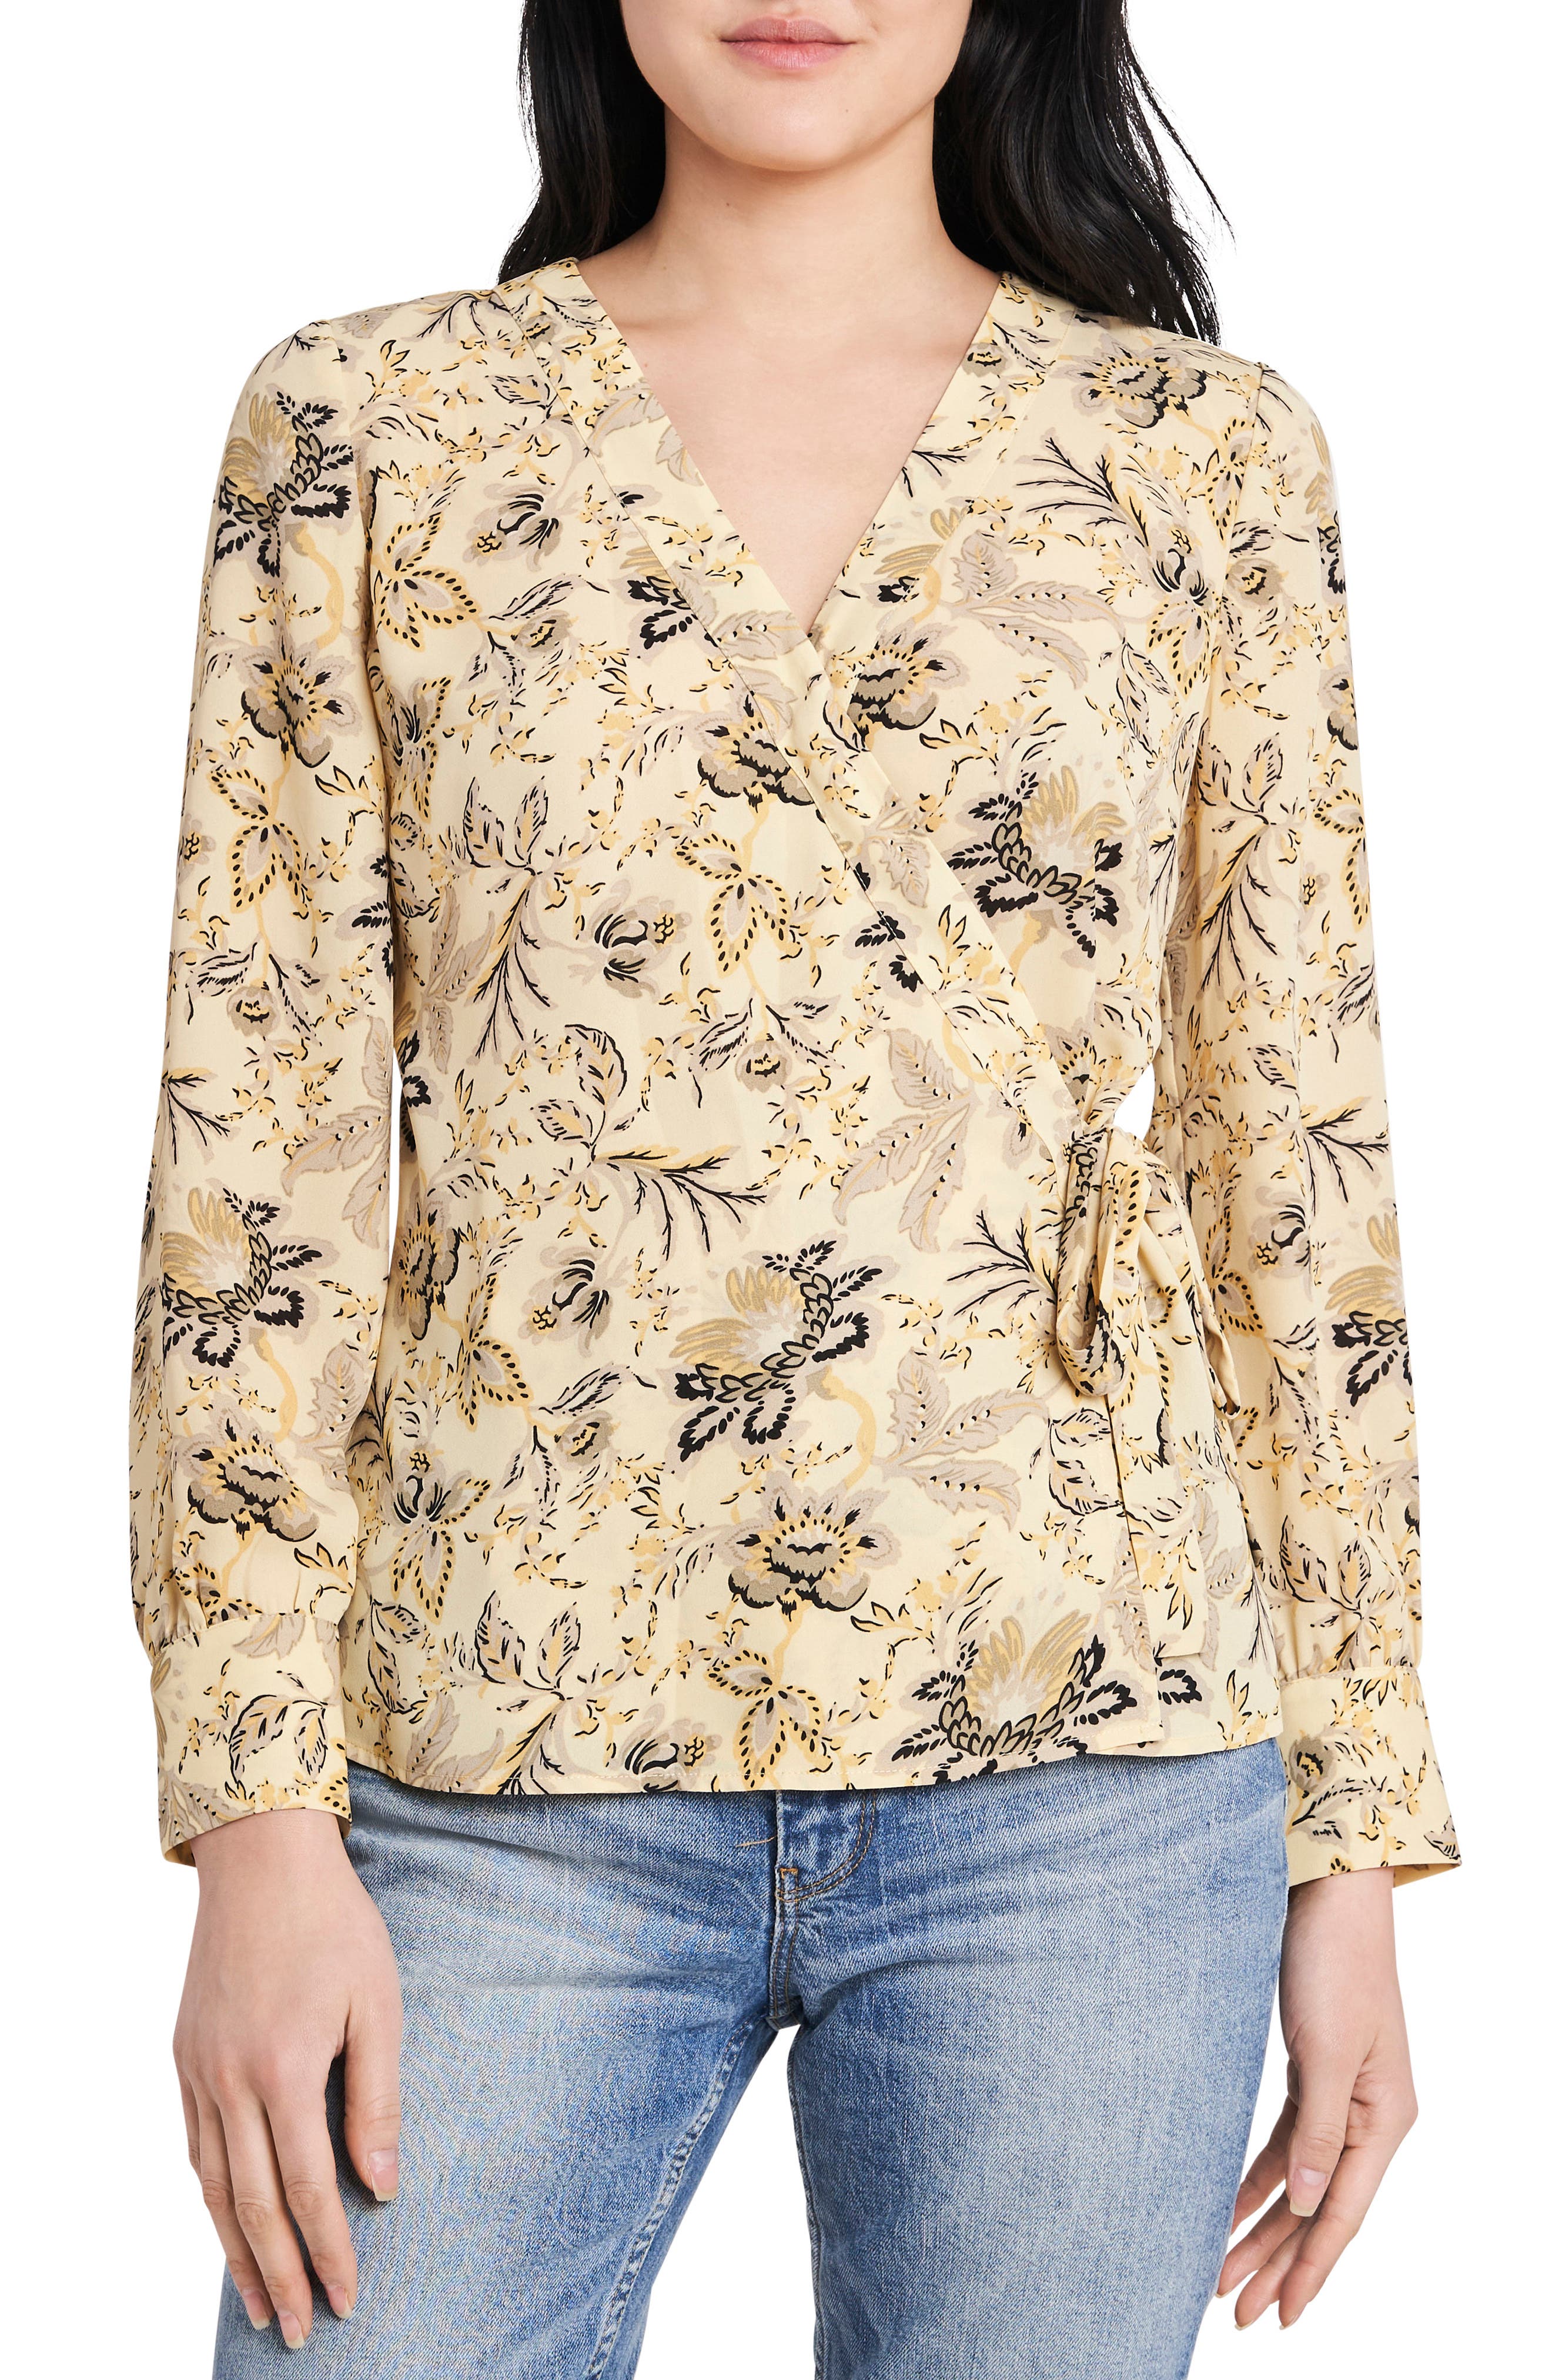 VINCE CAMUTO VINCE CAMTUO ANTIQUE FLORAL SIDE TIE LONG SLEEVE BLOUSE,195203343433